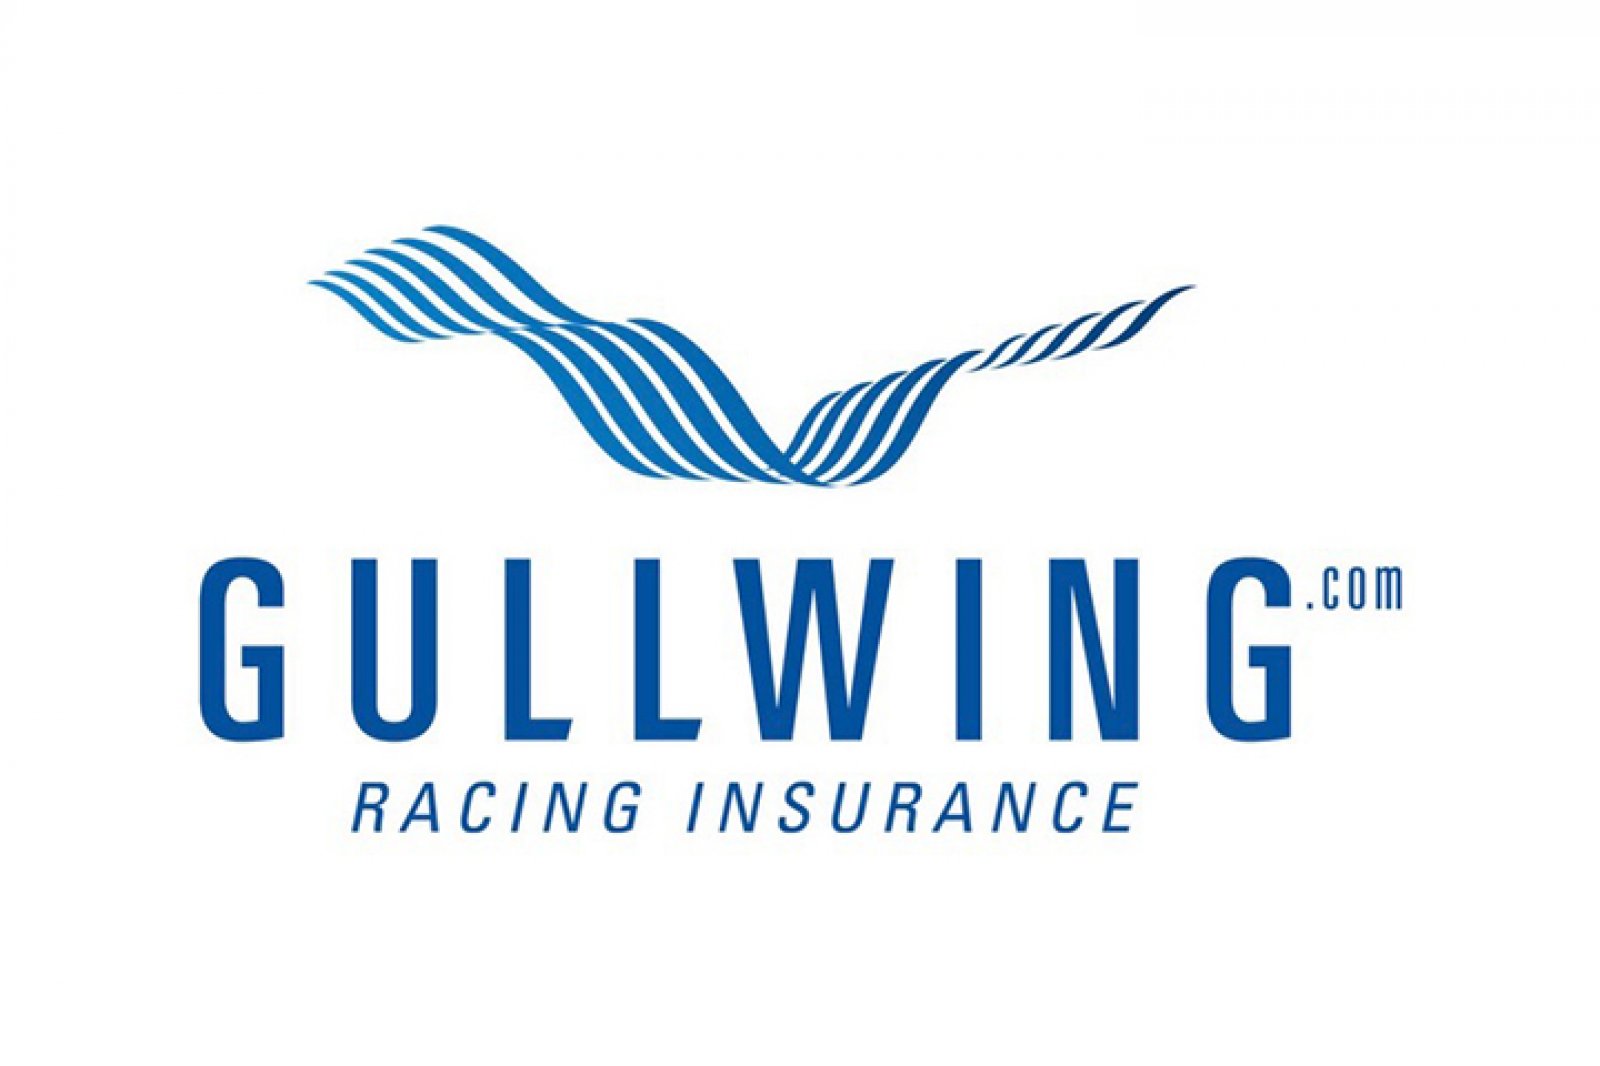 SRO Motorsports Group announces new partnership with Gullwing Racing Insurance